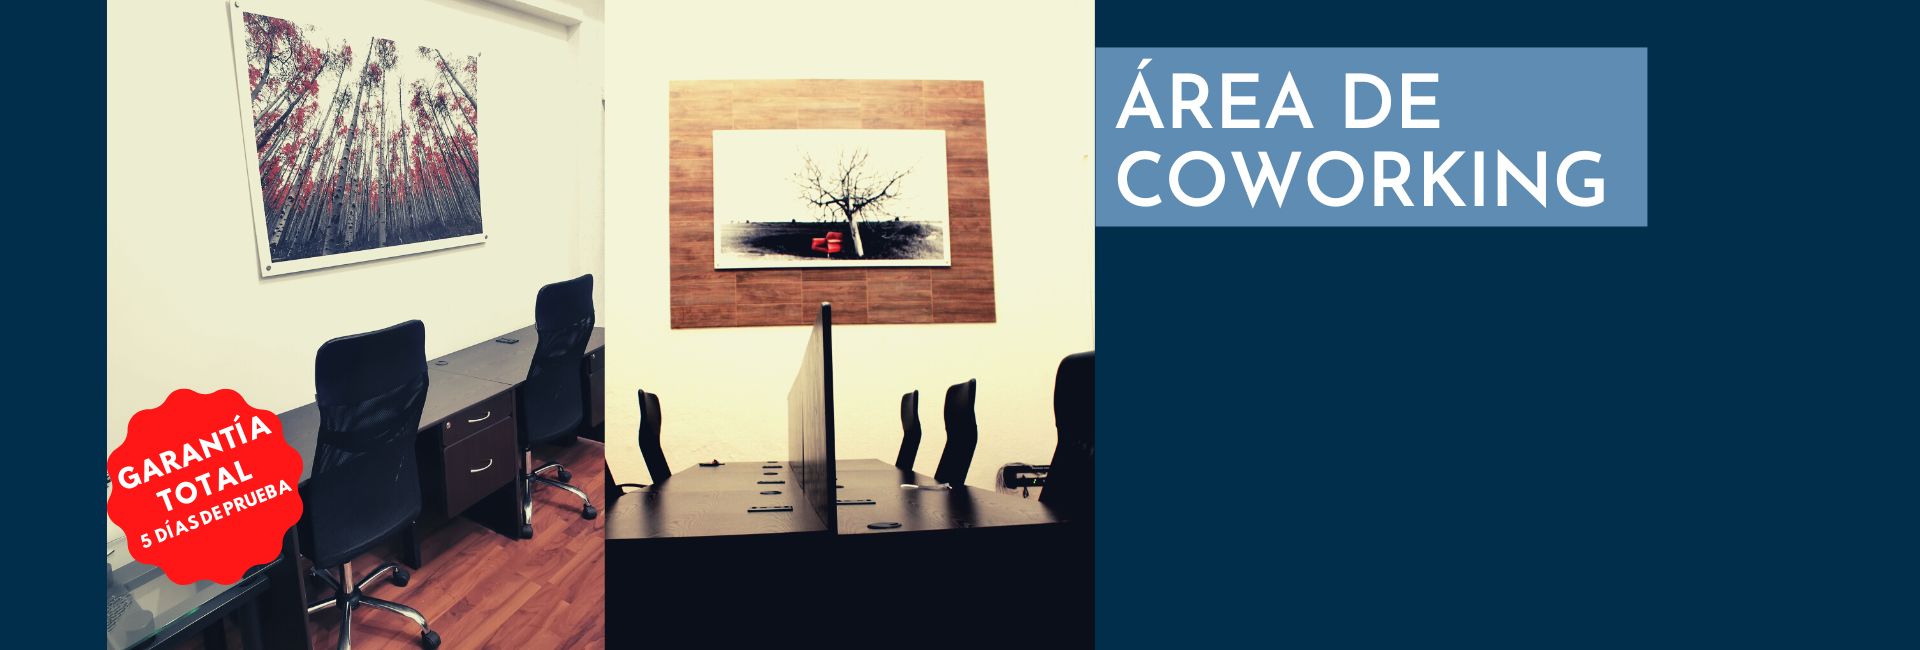 banner-coworking